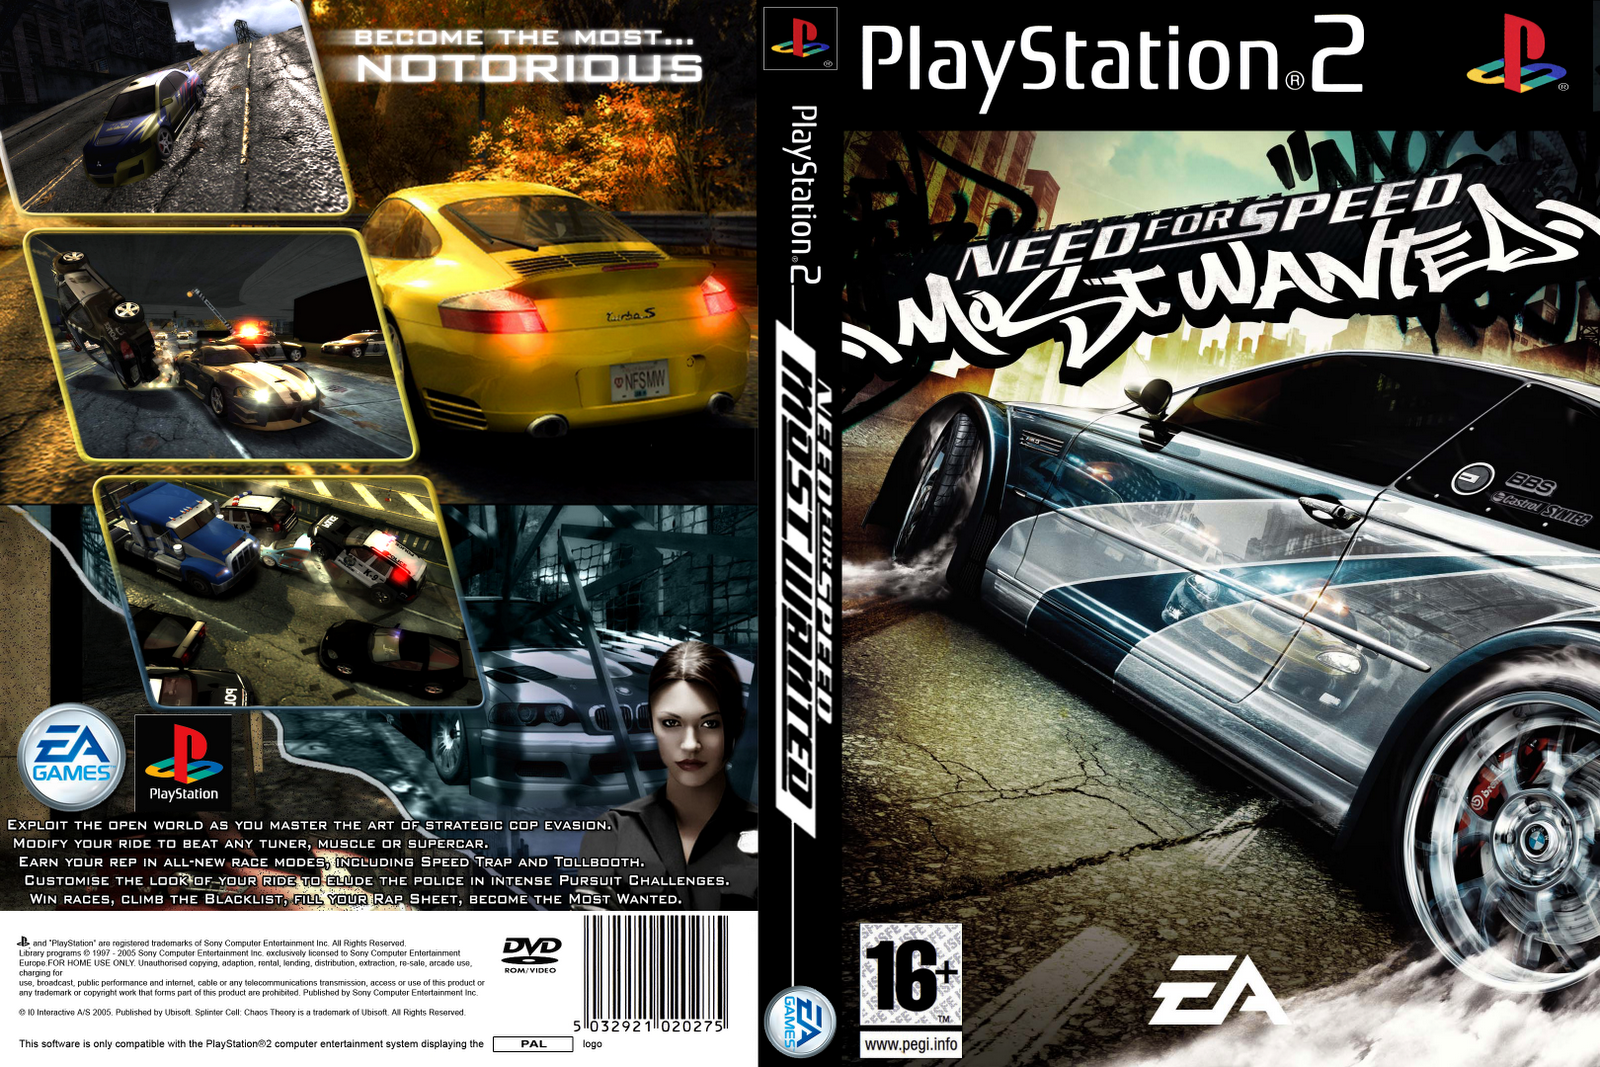 Музыка из игры most wanted. Диск для PLAYSTATION 2 need for Speed. Need for Speed most wanted ps2 диск. Need for Speed на ПС 2 диски. Игра NFS most wanted 2005.